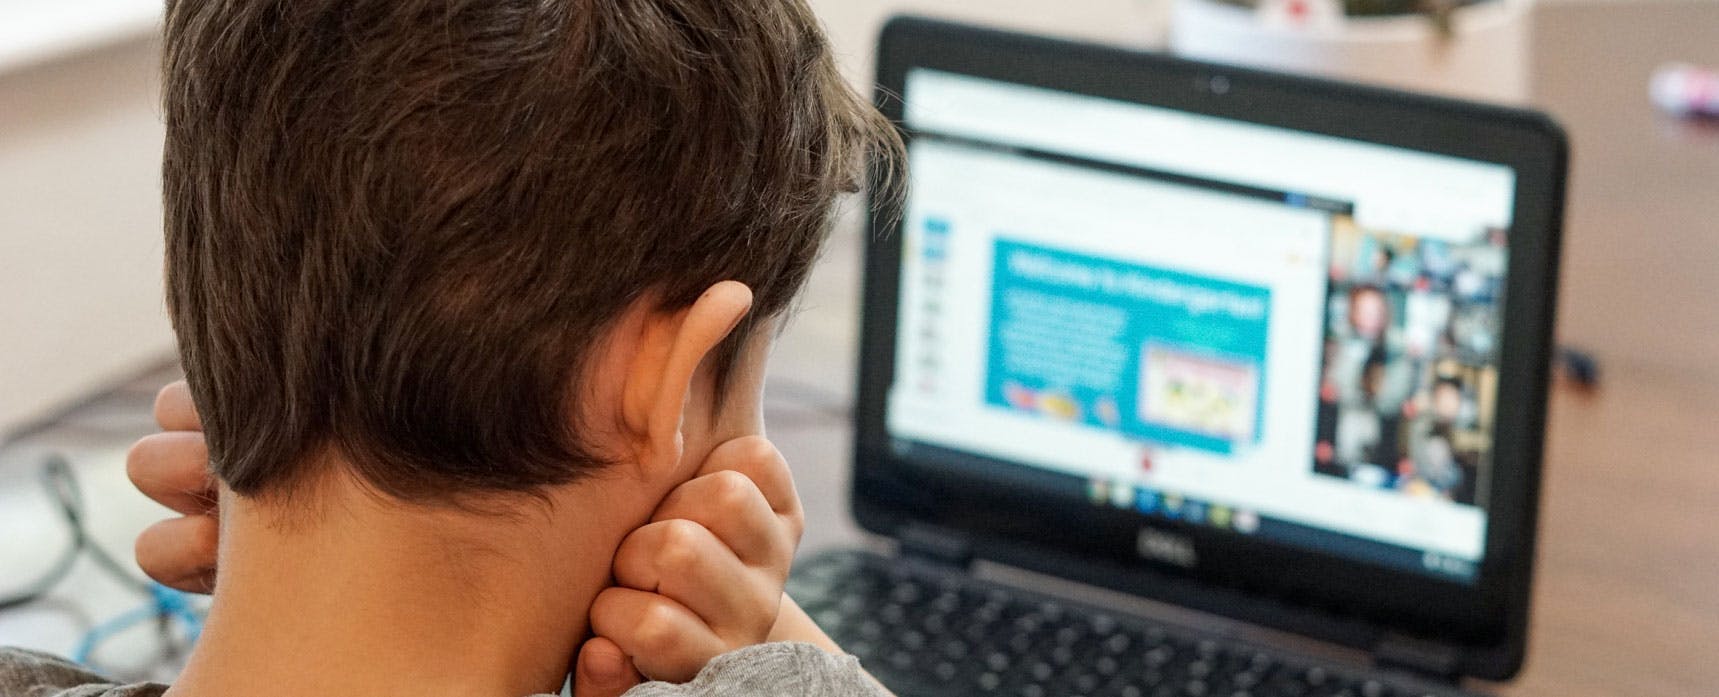 Safer Internet Day - How to Ensure Your Children Are Protected Online